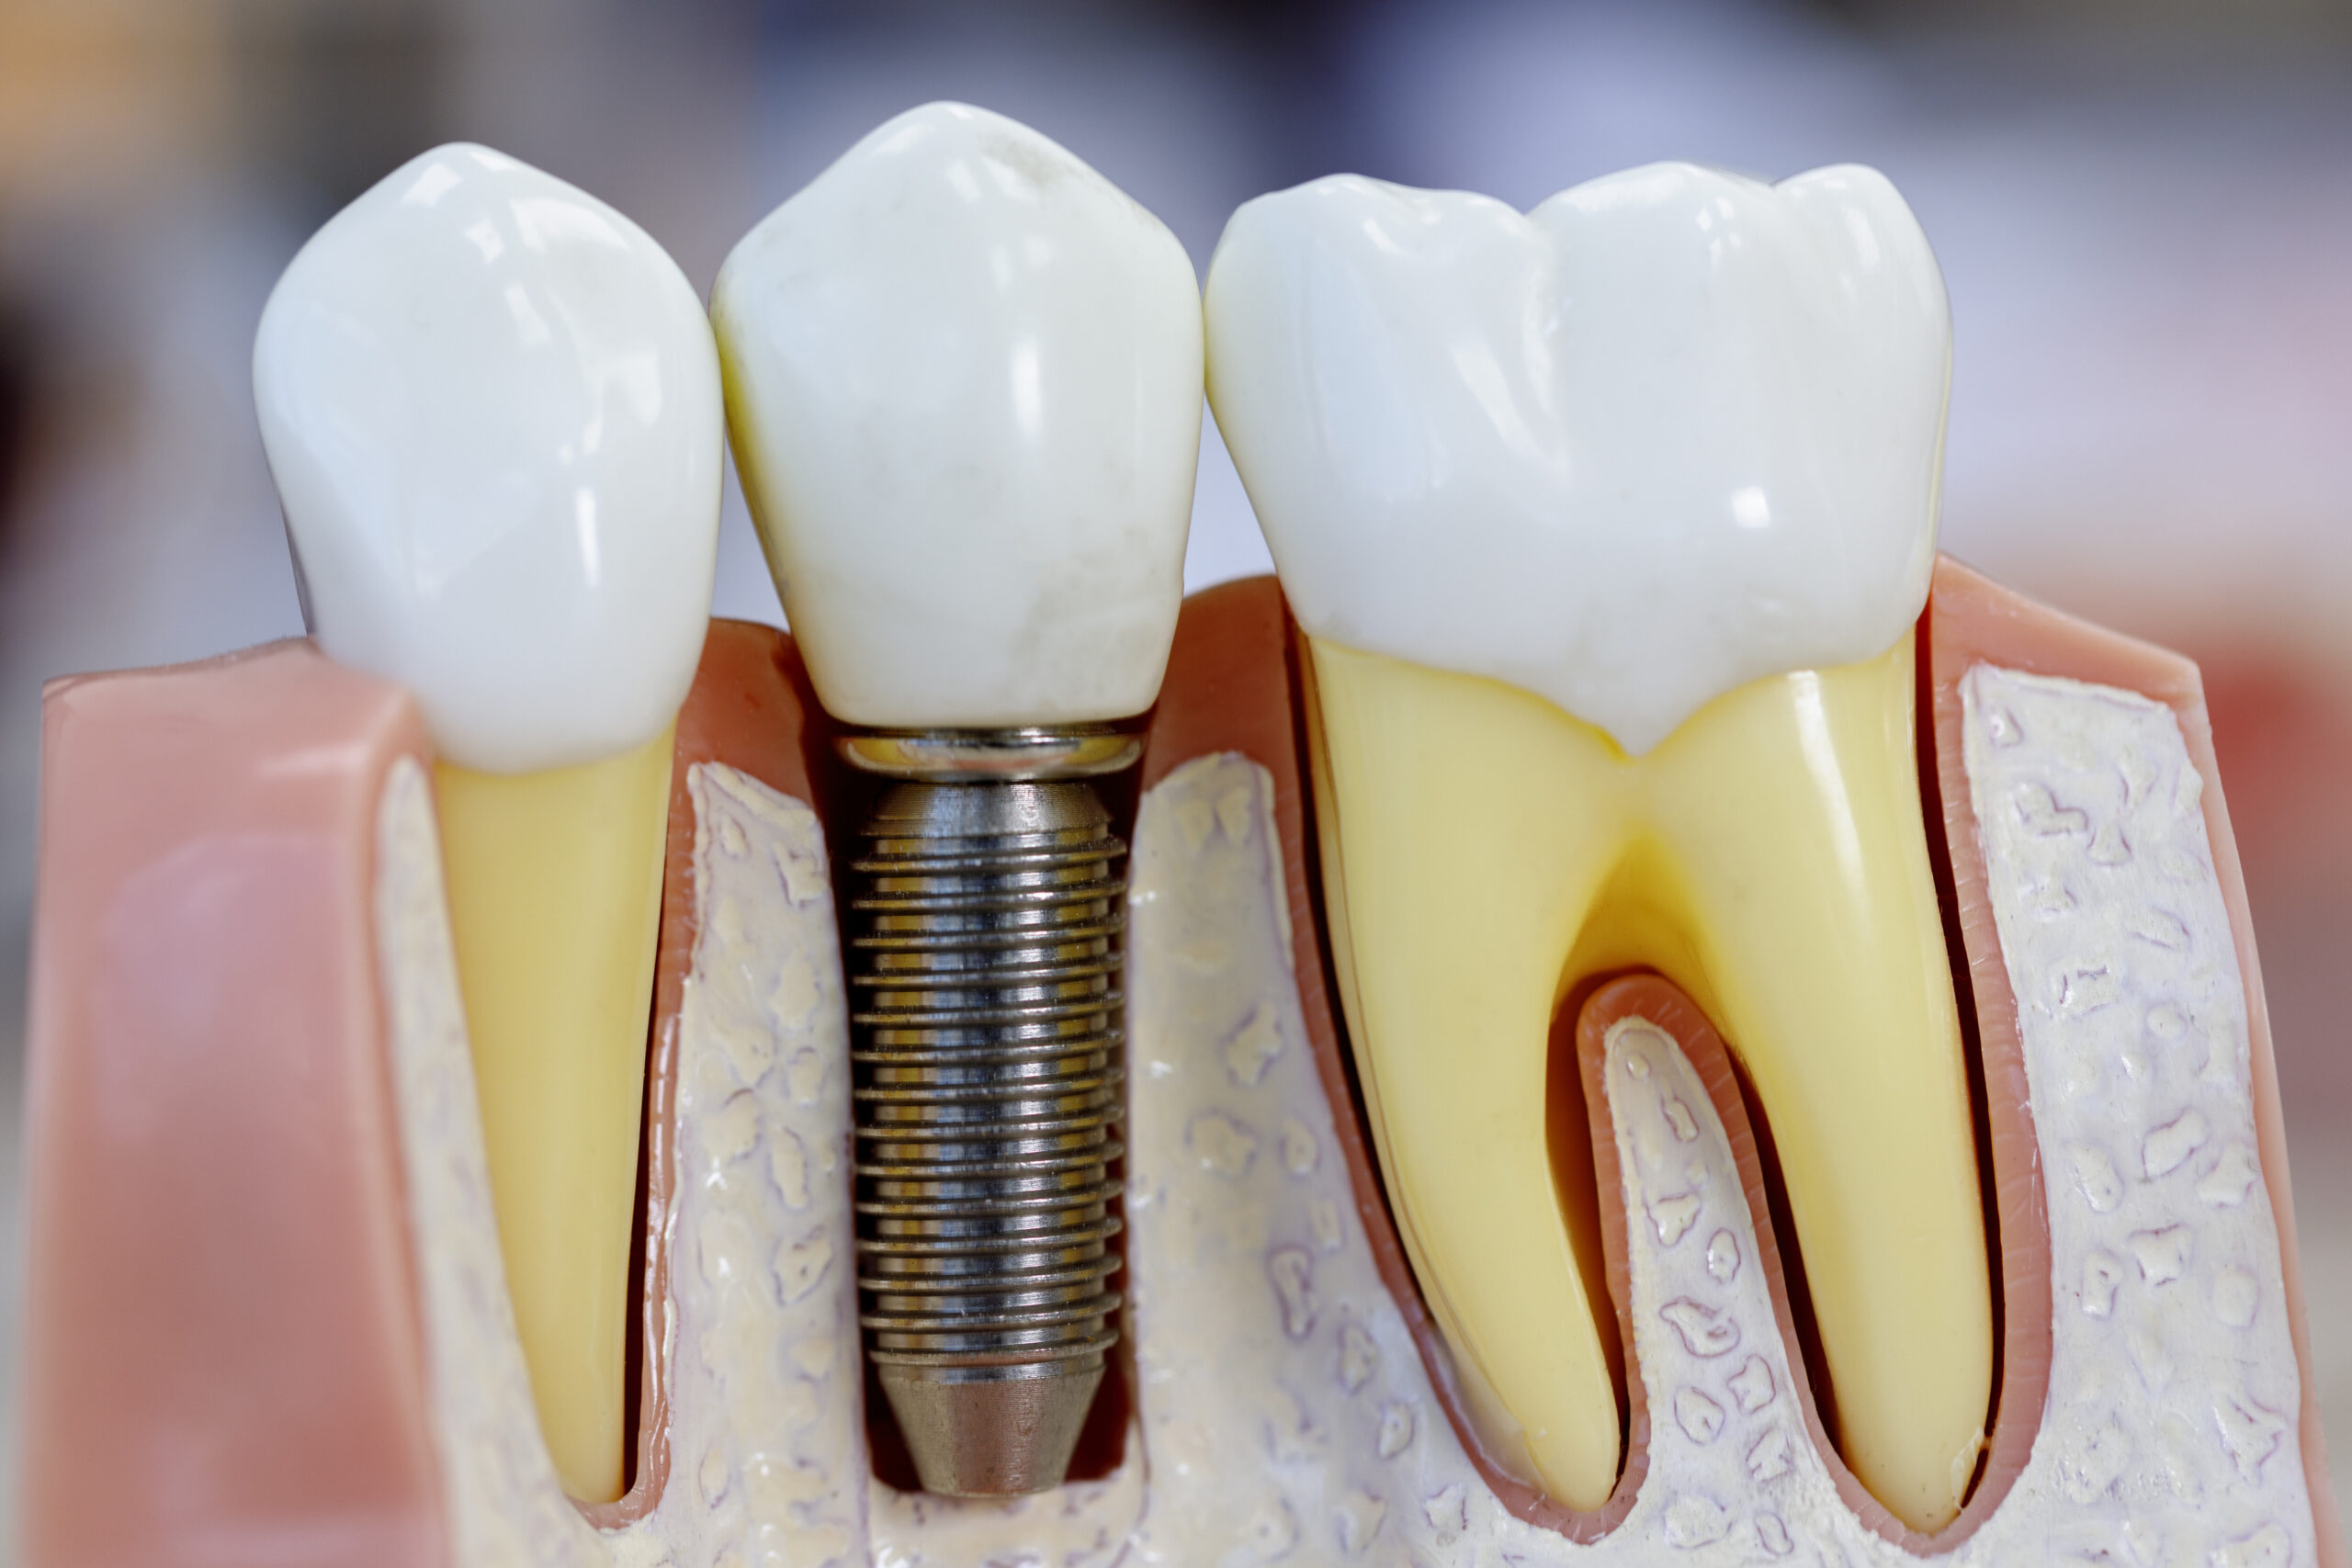 Single dental implants consist of three parts: a metal post replaces the root, an abutment attaches a crown, and the crown.